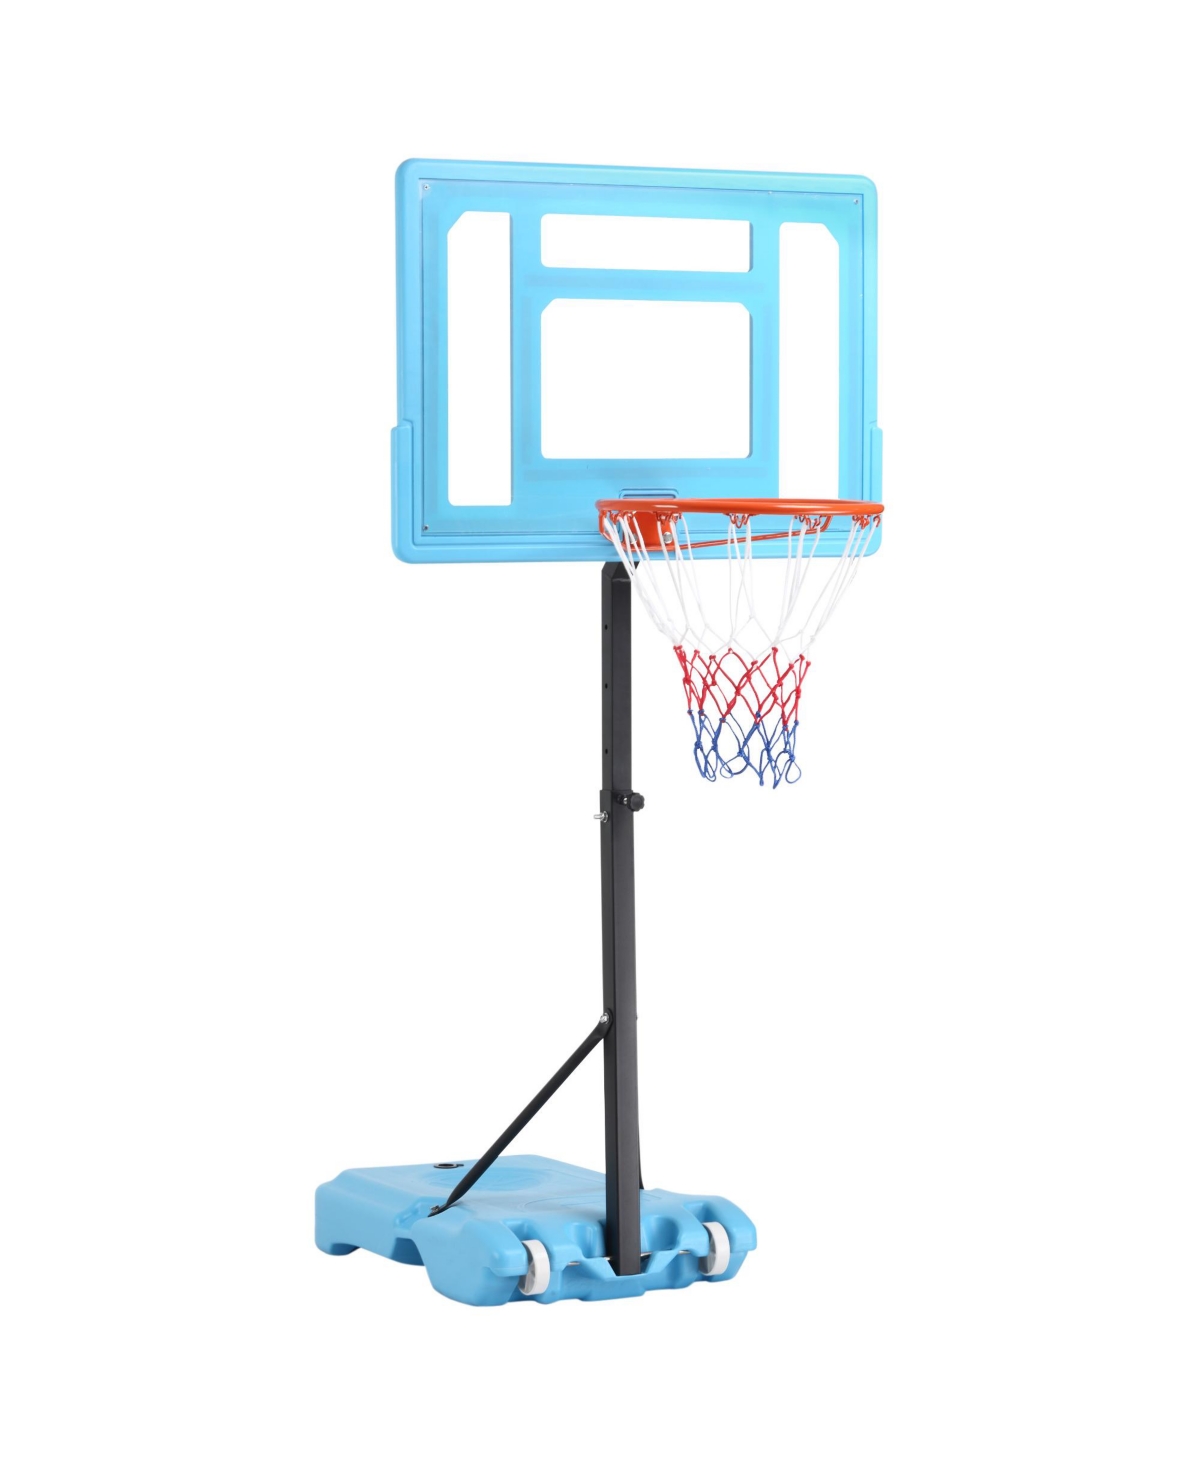 Poolside Basketball Hoop Stand, 36.5"-48.5" Height Adjustable Portable Hoop System w/ Clear Backboard & Fillable Base for Whole Family, Blue -